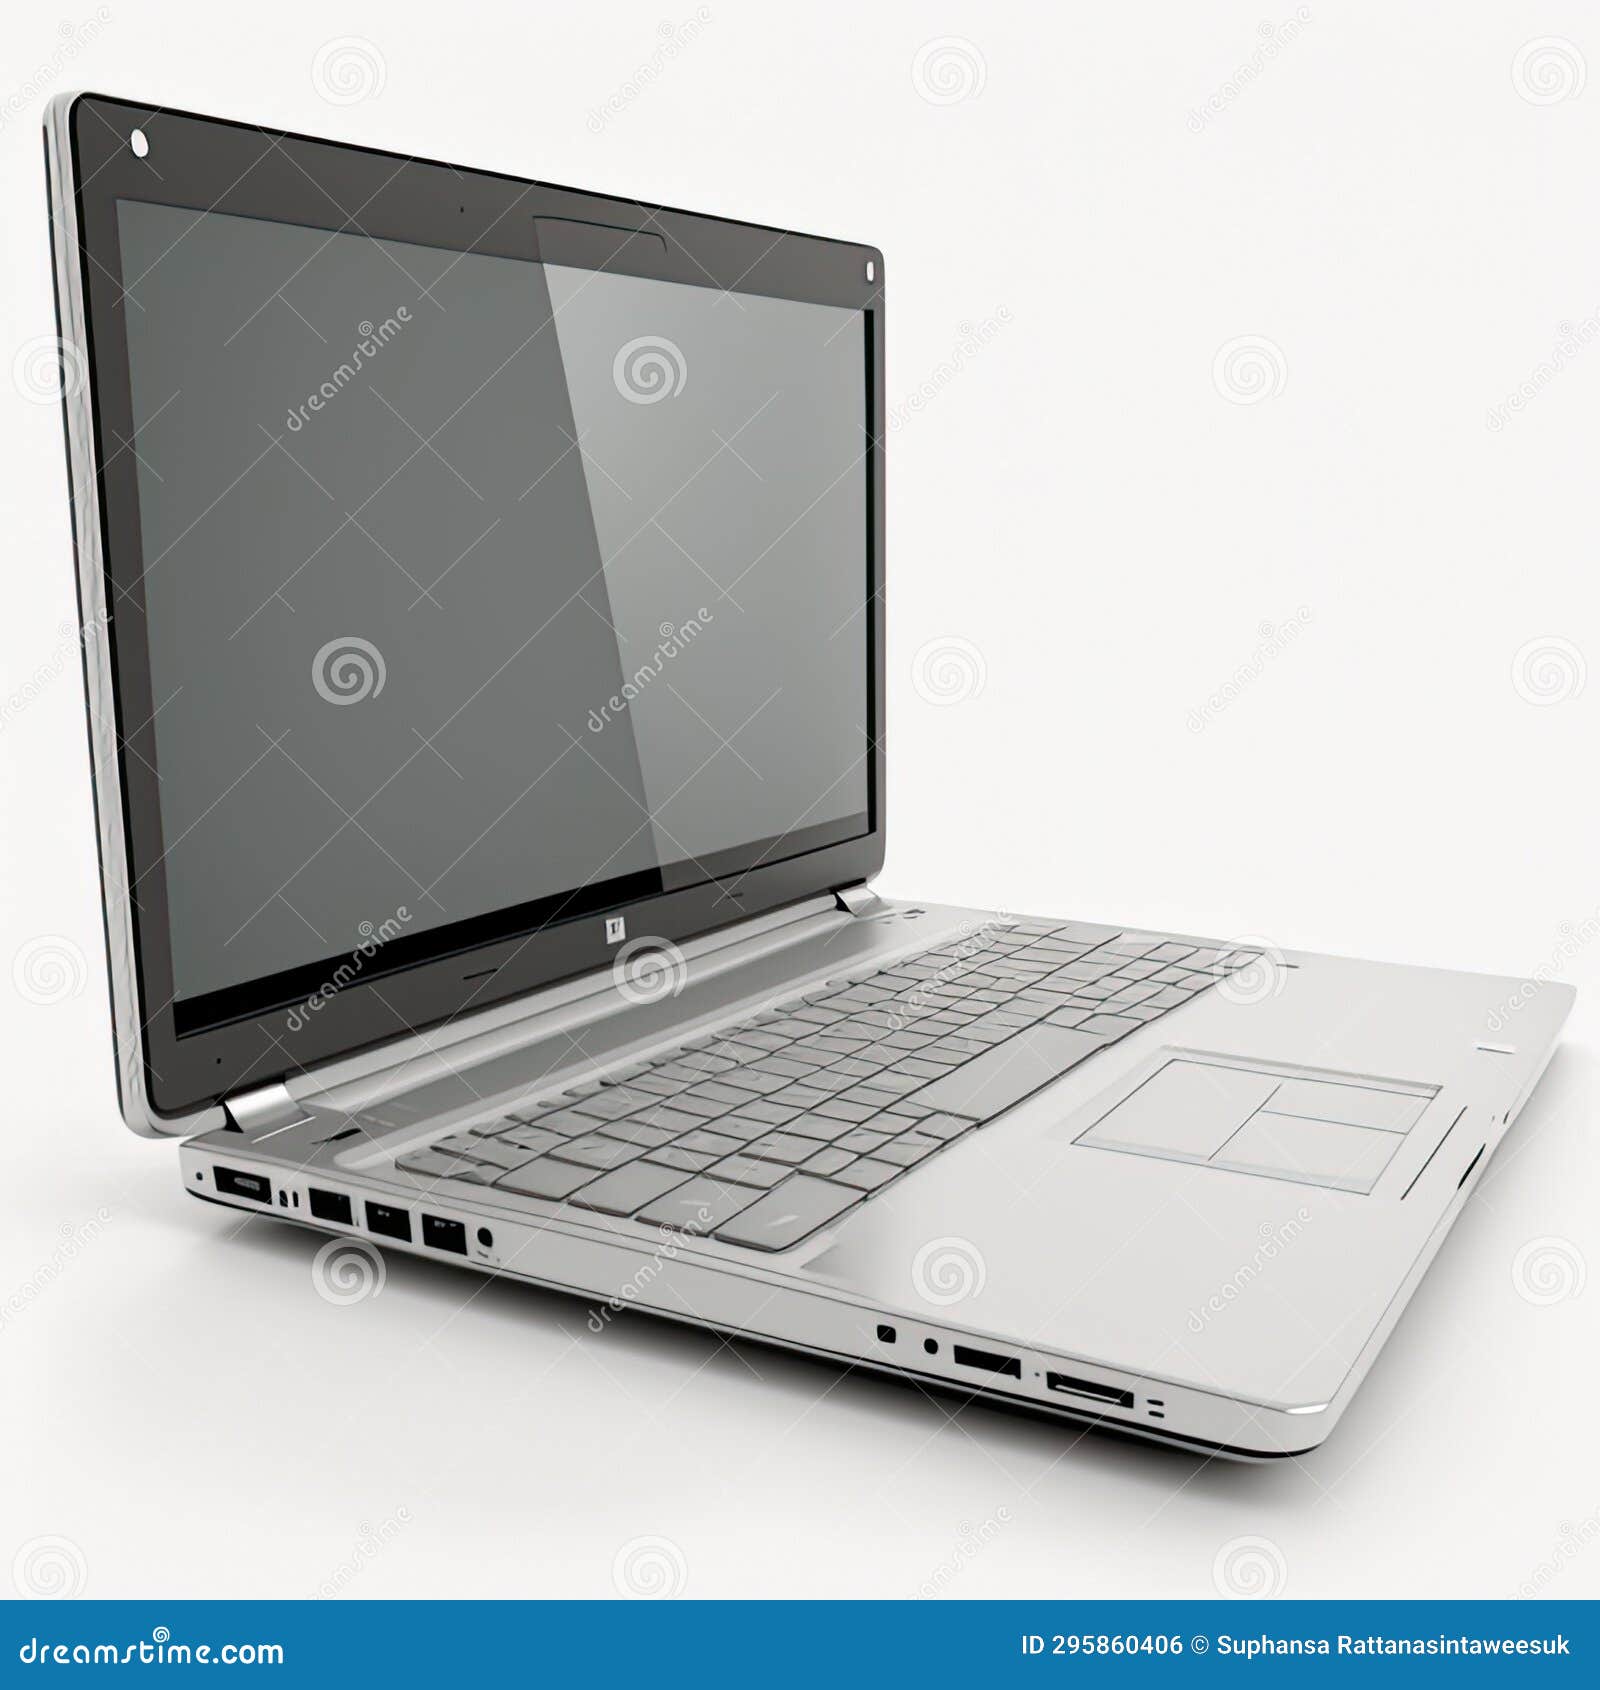 laptop computer on white background